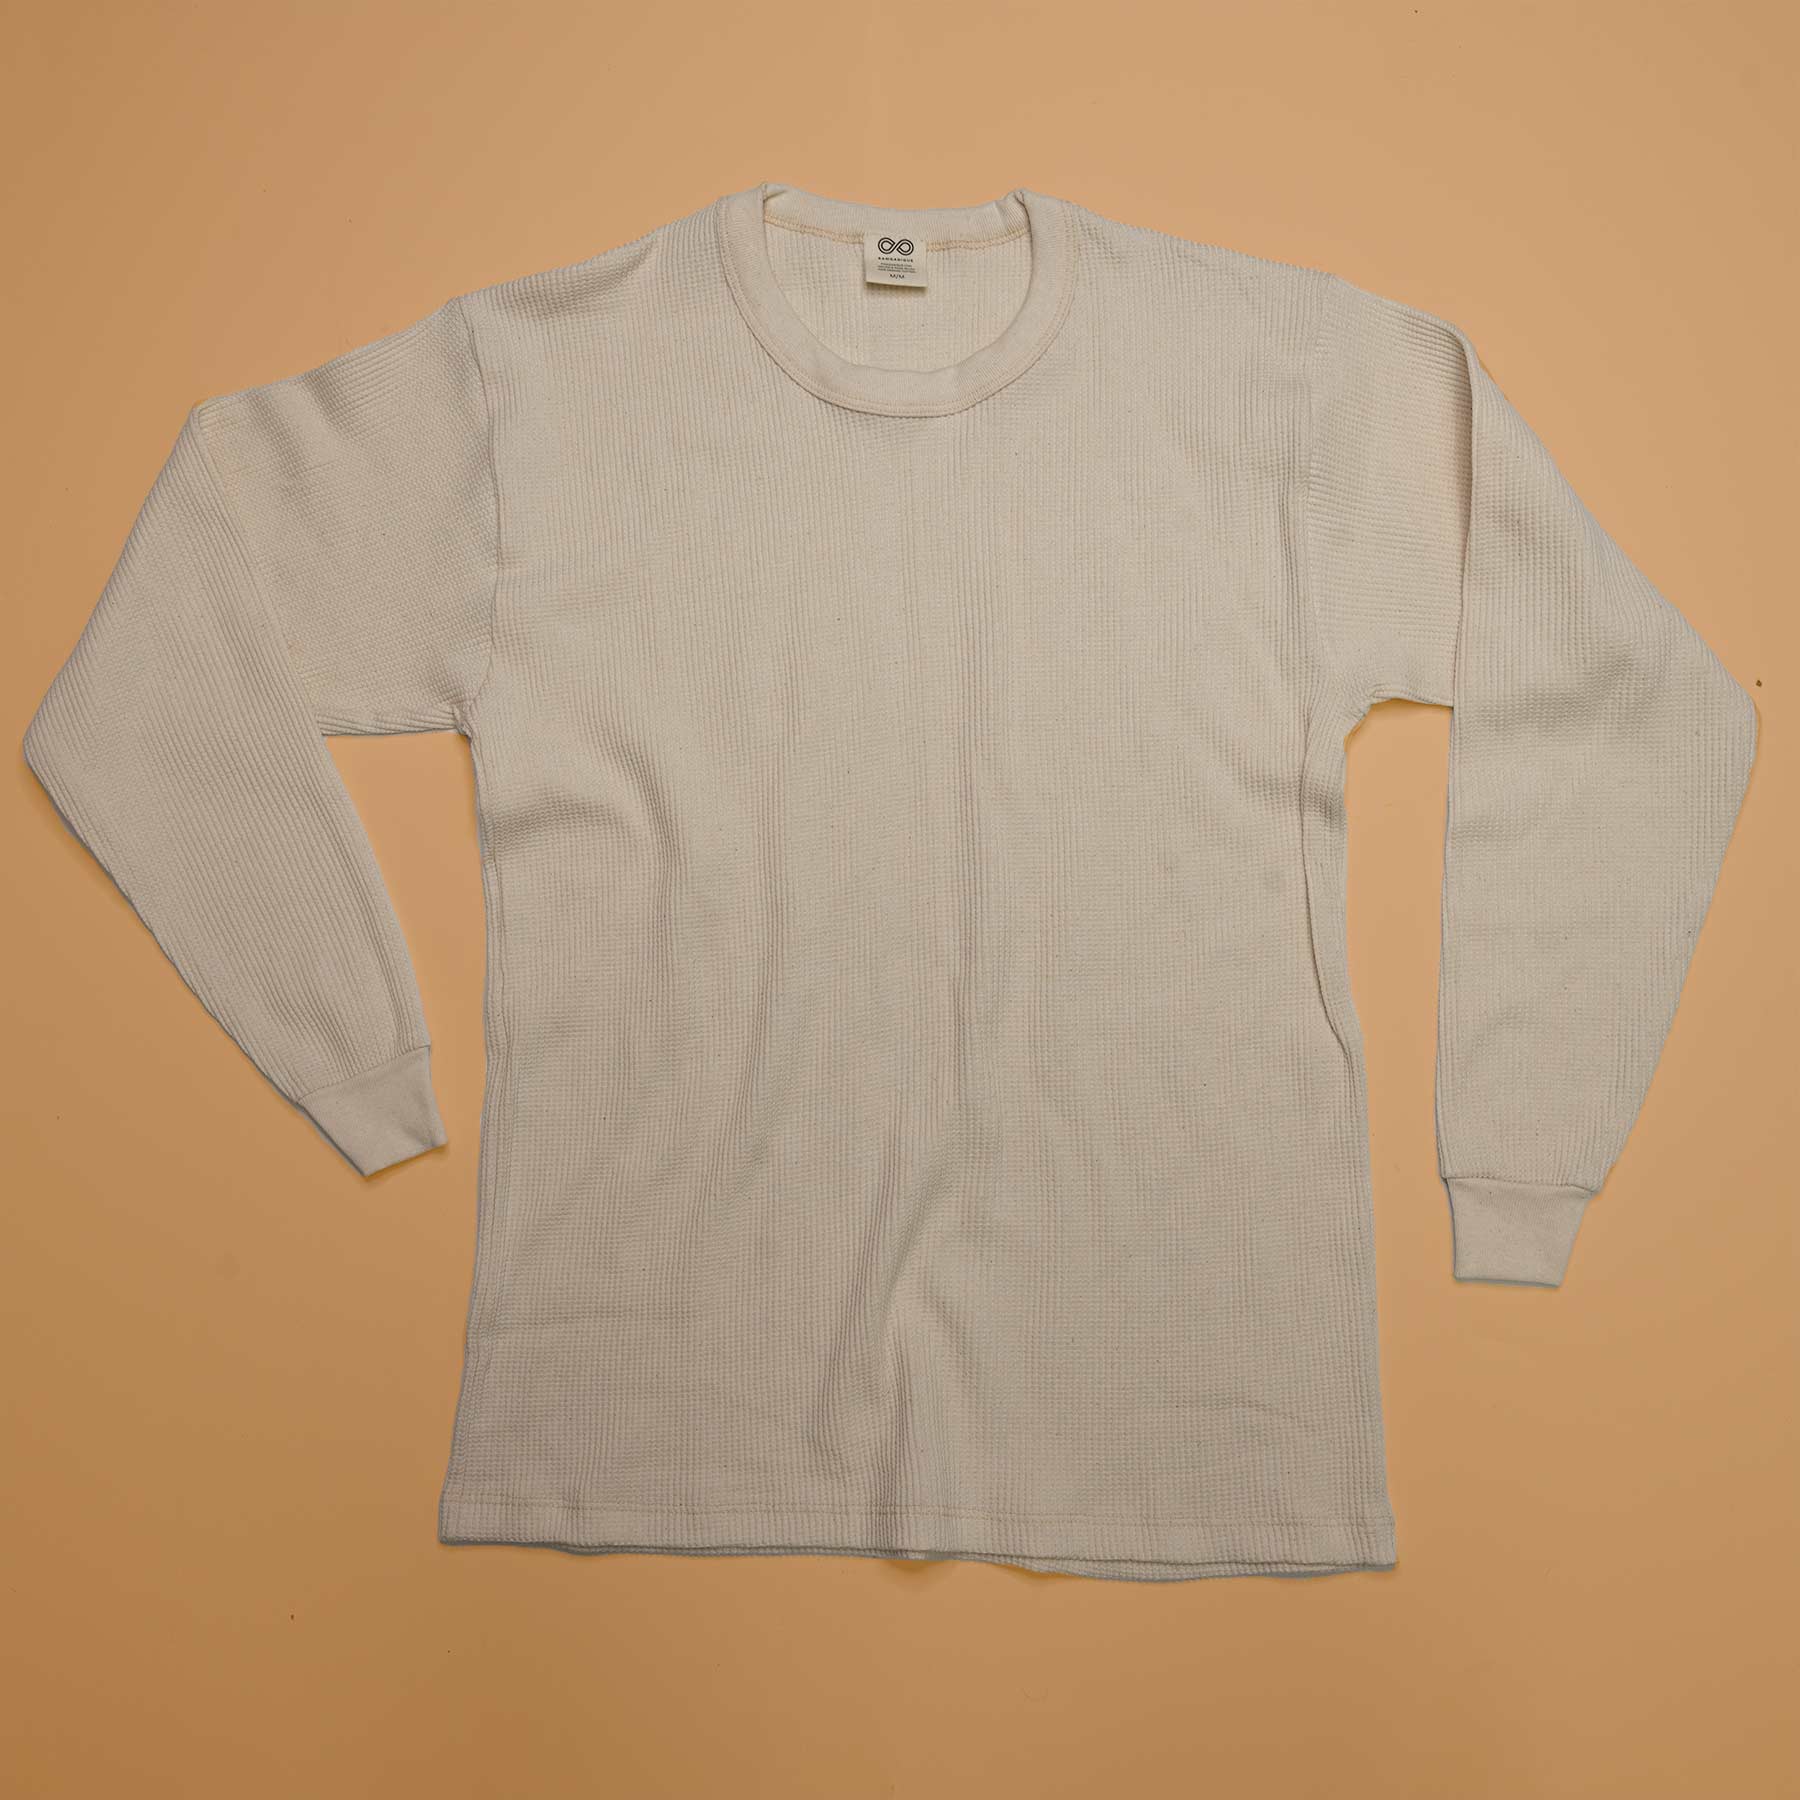 Graphite Organic Cotton Waffle Thermal Fabric - Grown in the USA